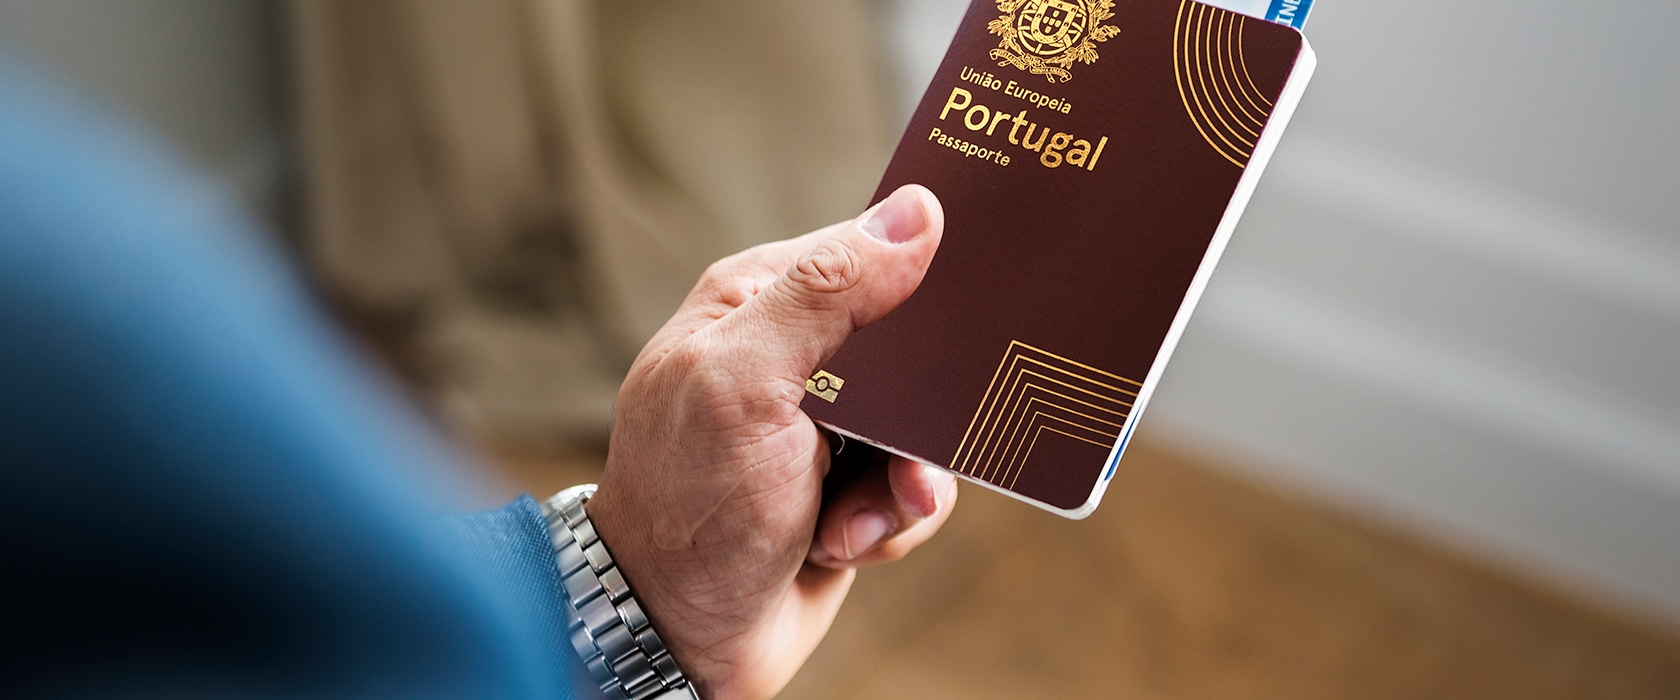 Golden Visa Portugal 2021, The Ultimate Guide by Experts